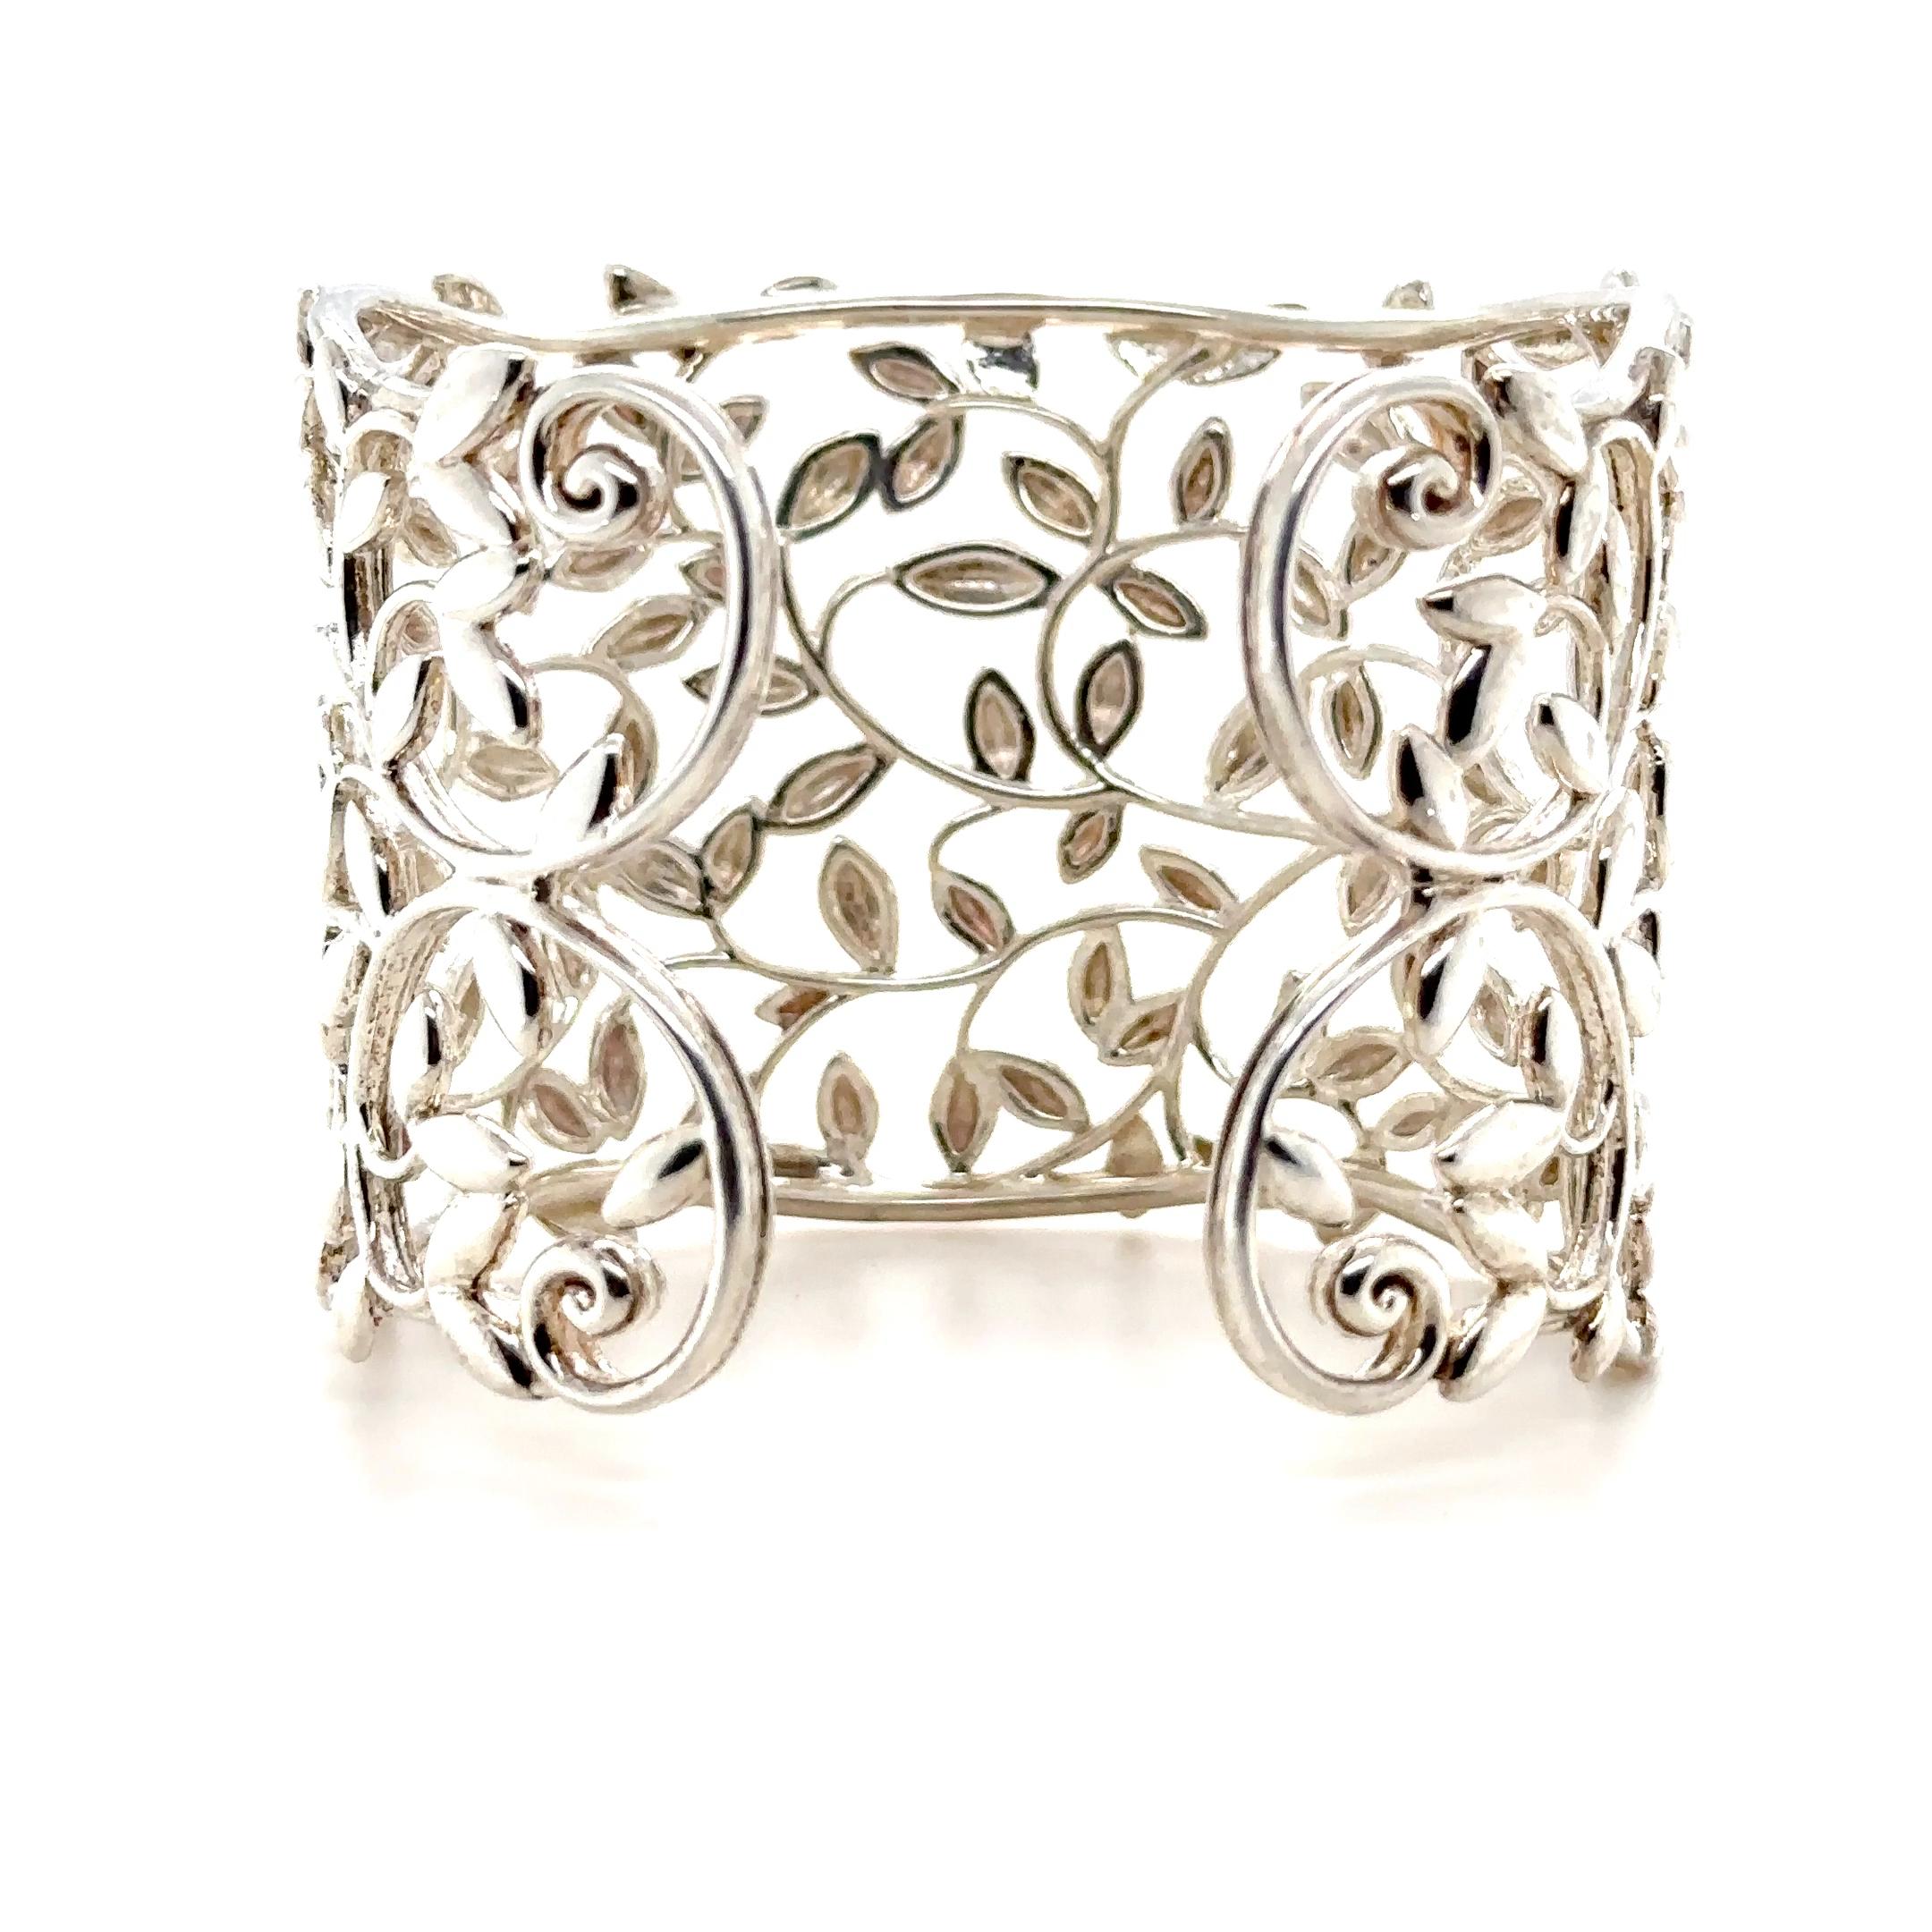 A Tiffany & Co Paloma Picasso Olive Leaf Cuff in Sterling Silver.

Inspired by the olive branch, a symbol of peace and abundance. Size Small. Original designs by Paloma Picasso

Metal: 925 Sterling Silver
Carat: N/A
Colour: N/A
Clarity: N/A
Cut: